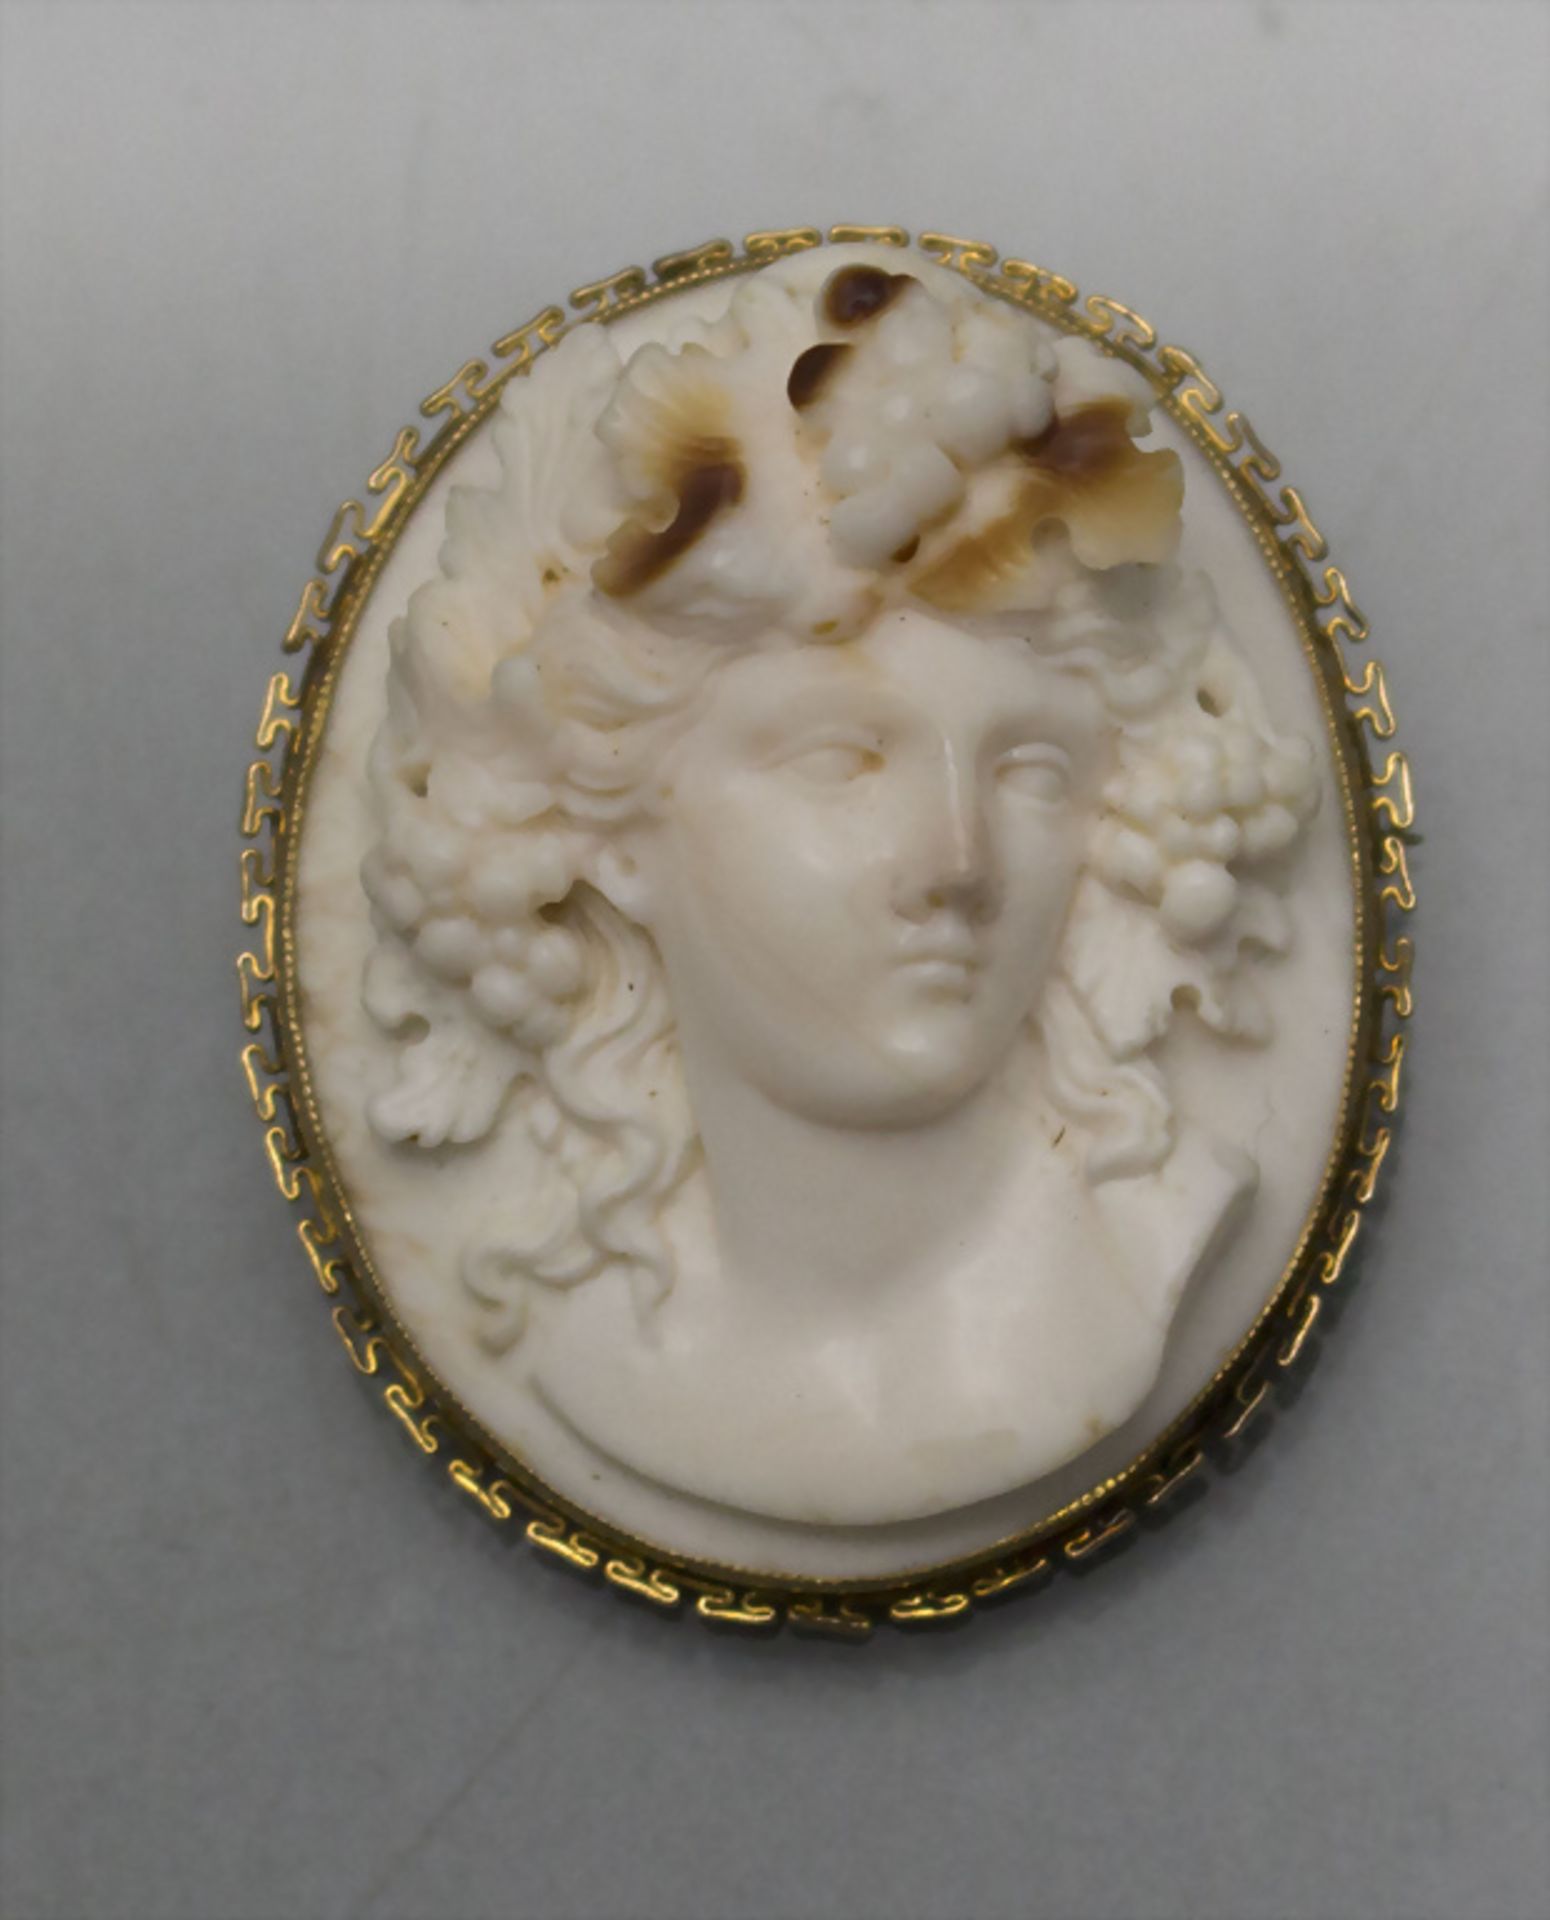 Kamee Brosche / A cameo brooch in a gold frame